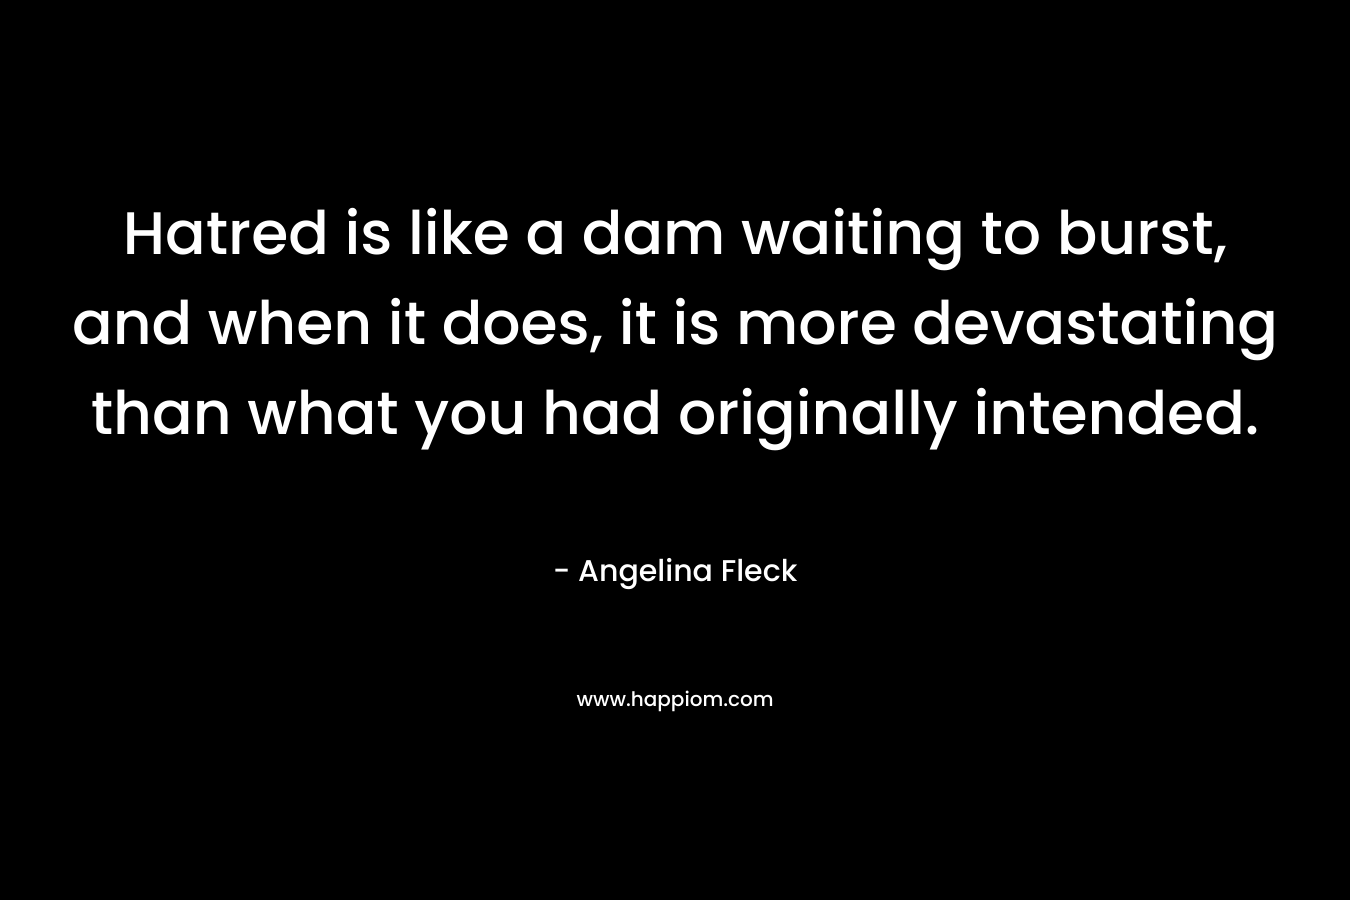 Hatred is like a dam waiting to burst, and when it does, it is more devastating than what you had originally intended. – Angelina Fleck